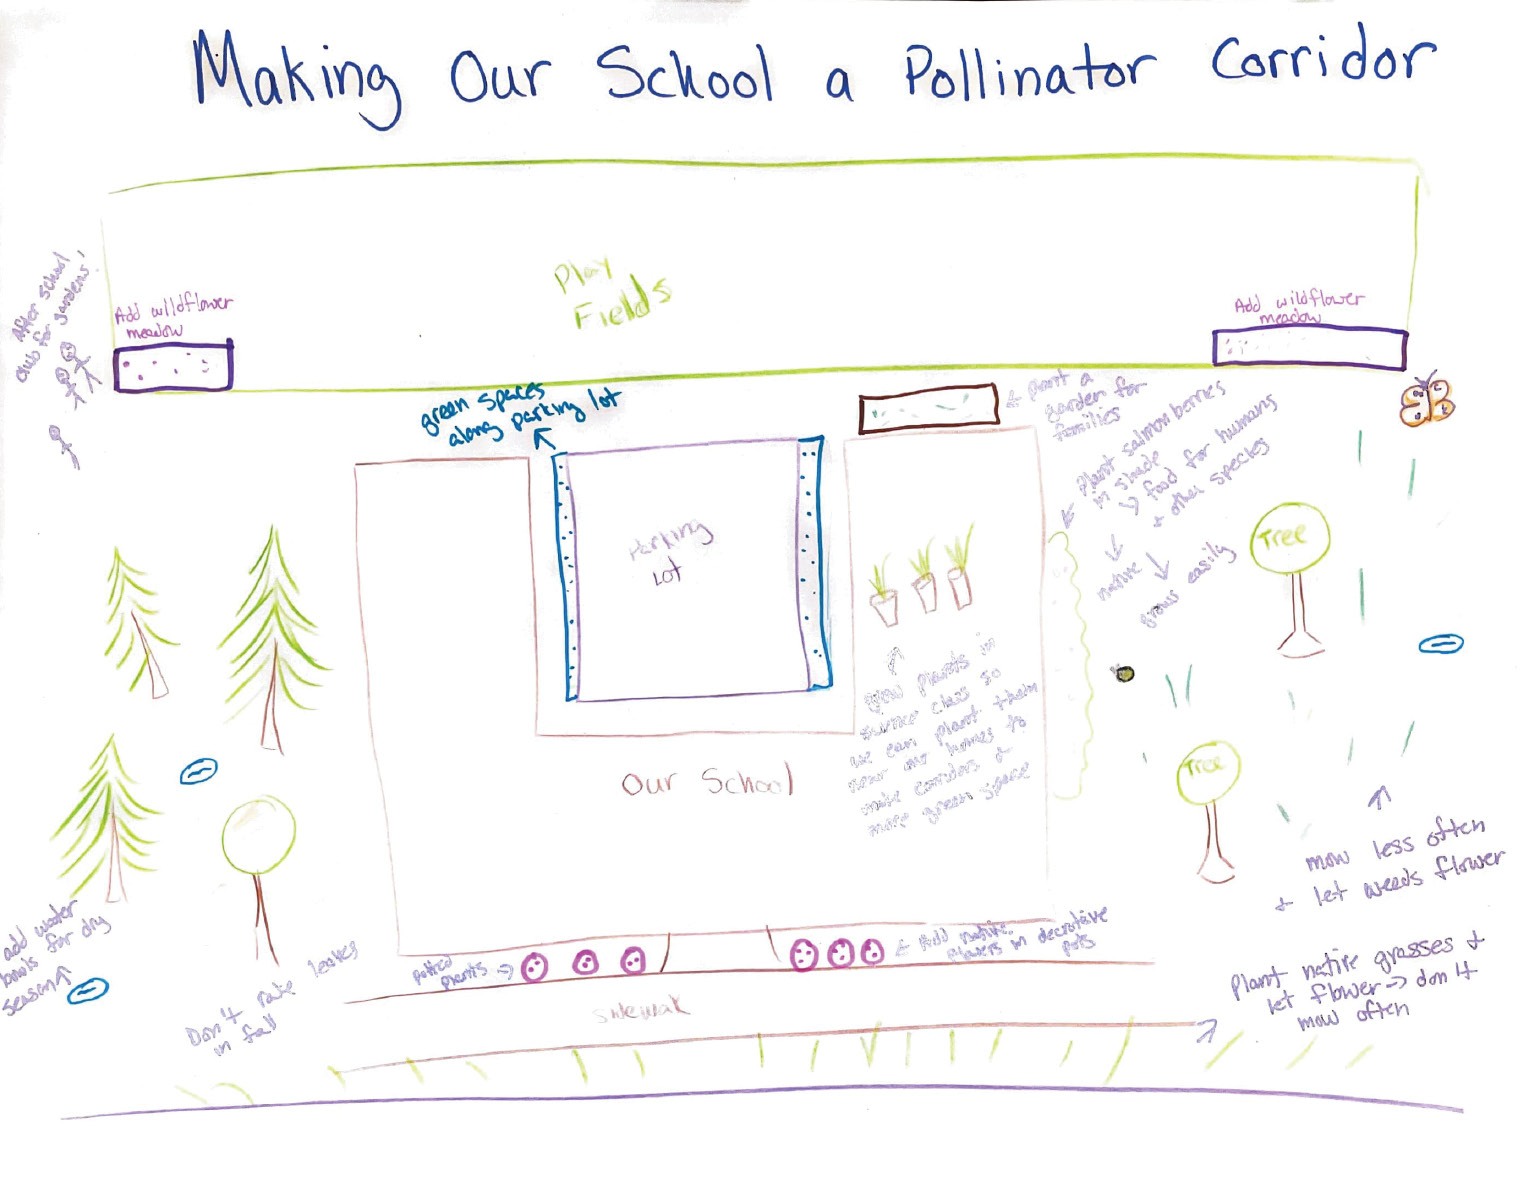 Image 4. Students collaborate to sketch solutions for supporting pollinator health in their own neighborhoods and around their school.